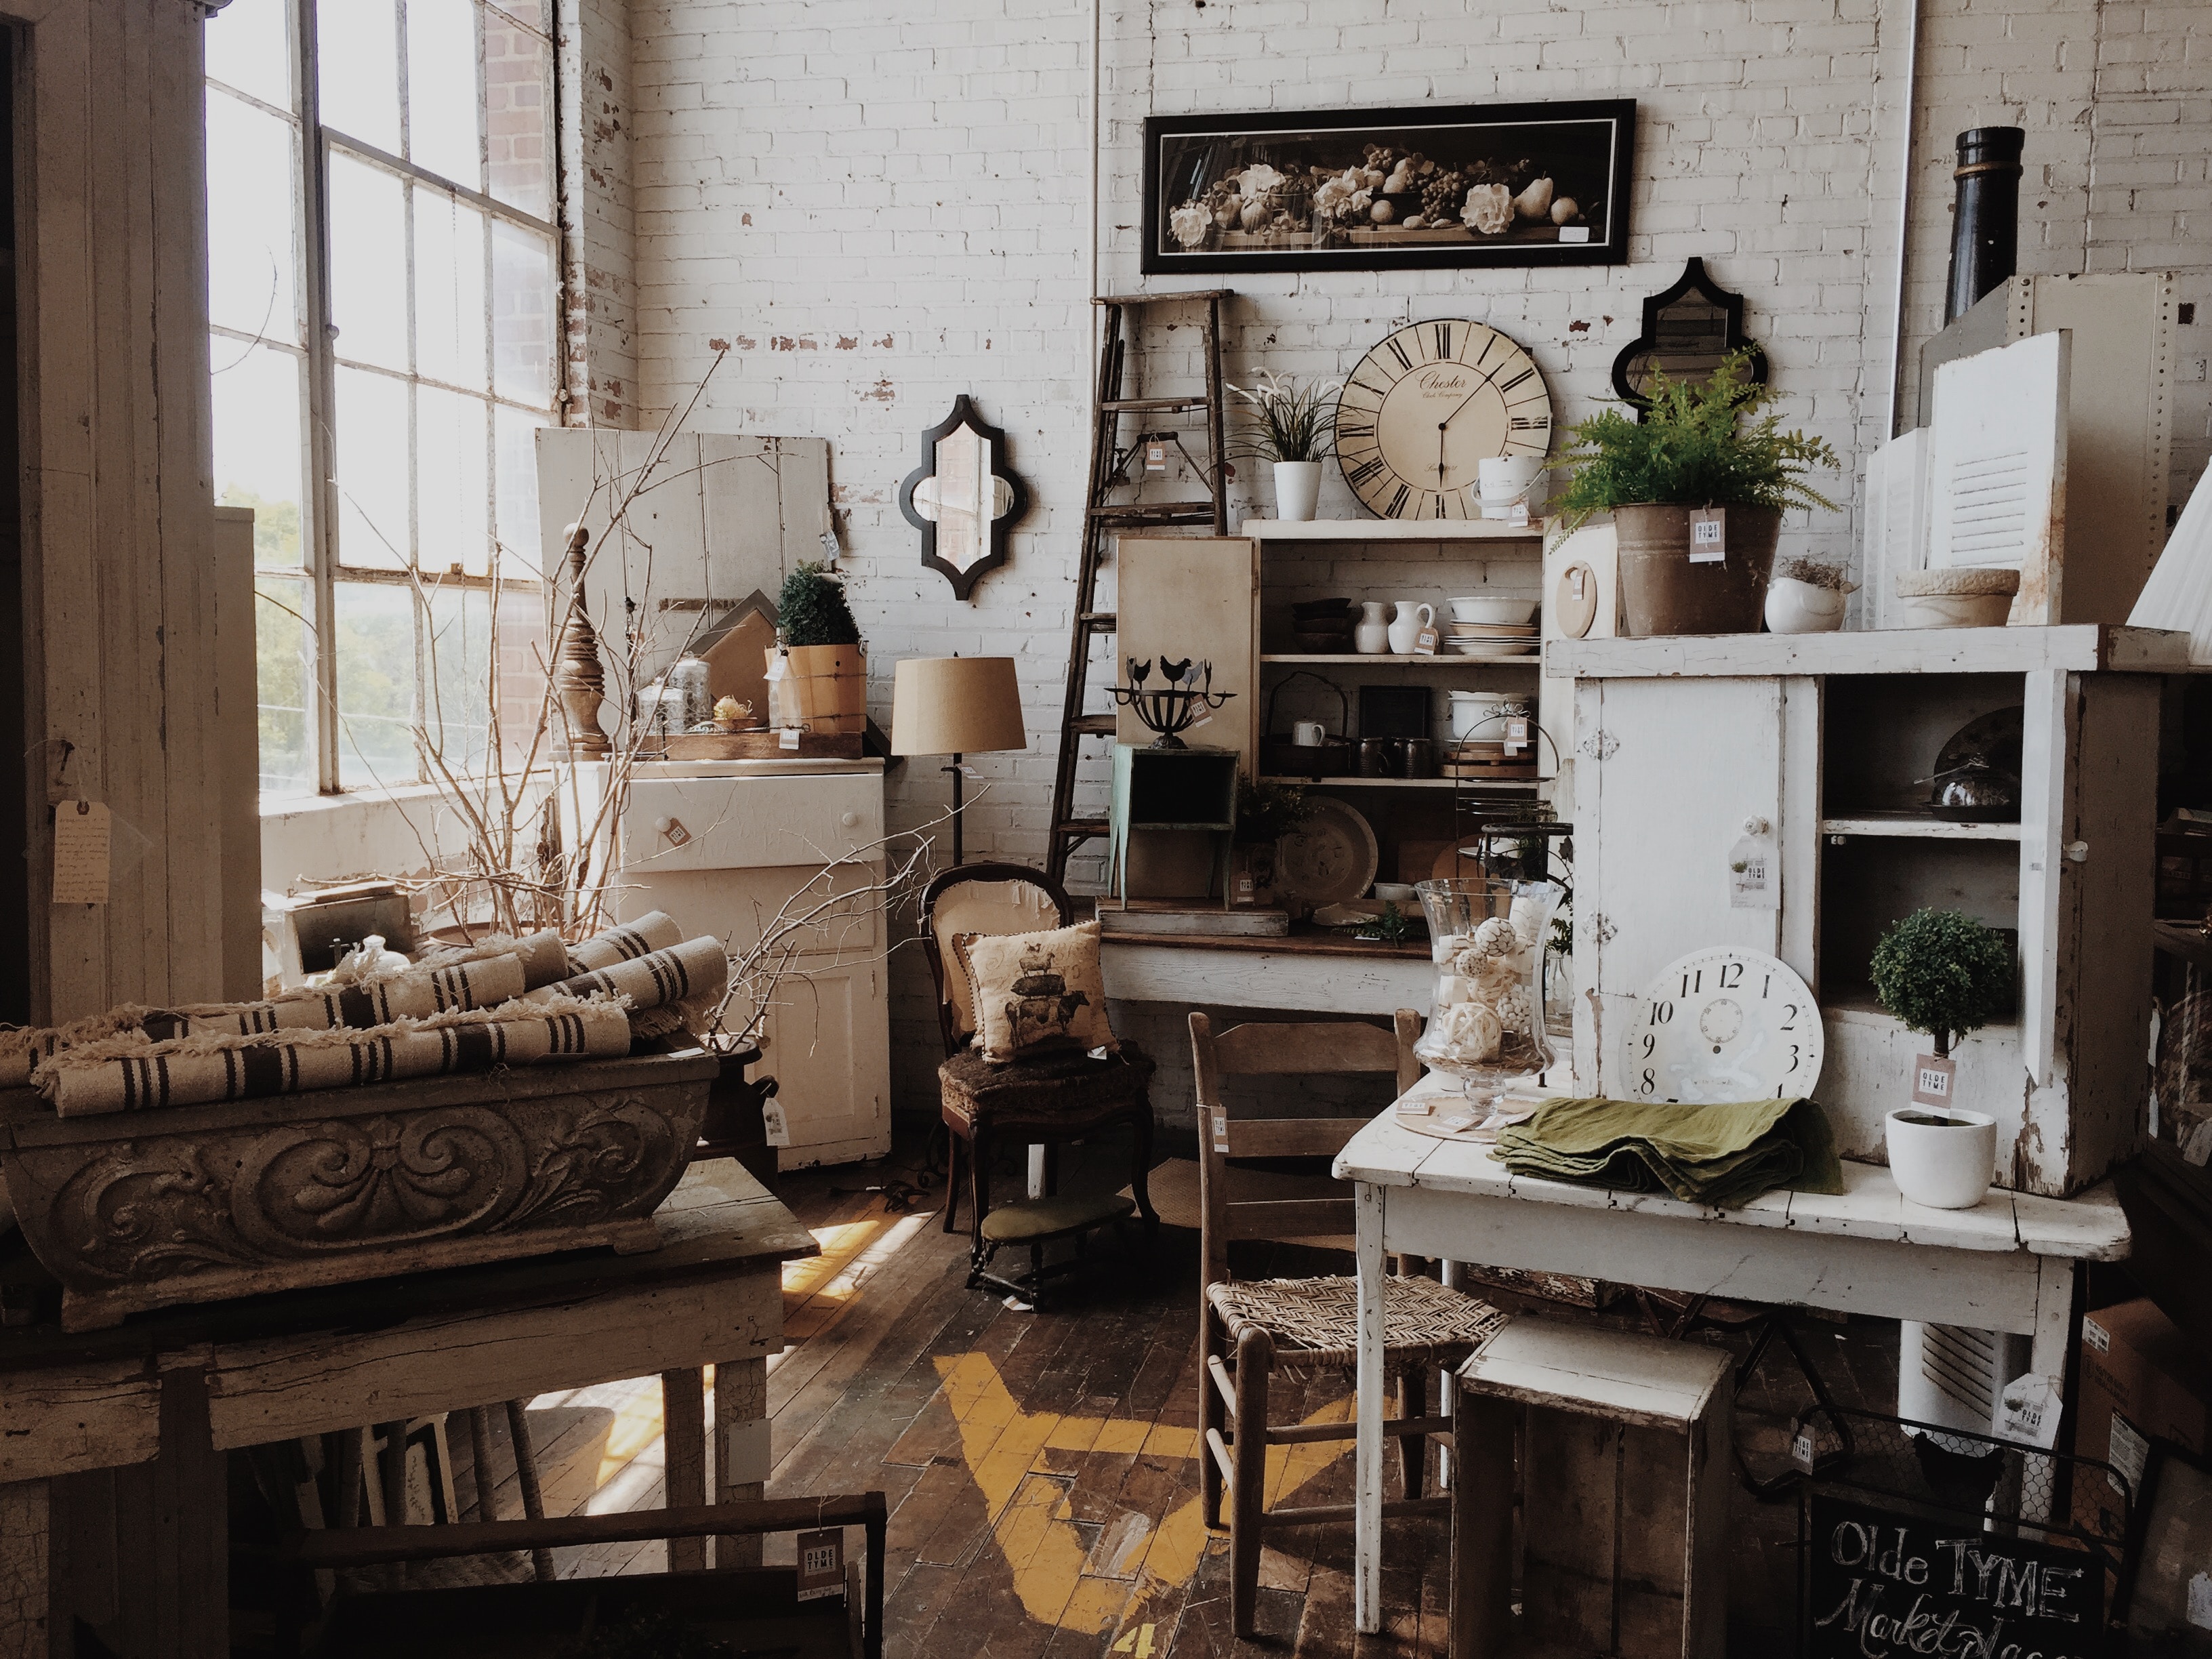 A naturally lit room full of white and brown antiques, including furniture, clocks, lamps, a ladder, and pottery.